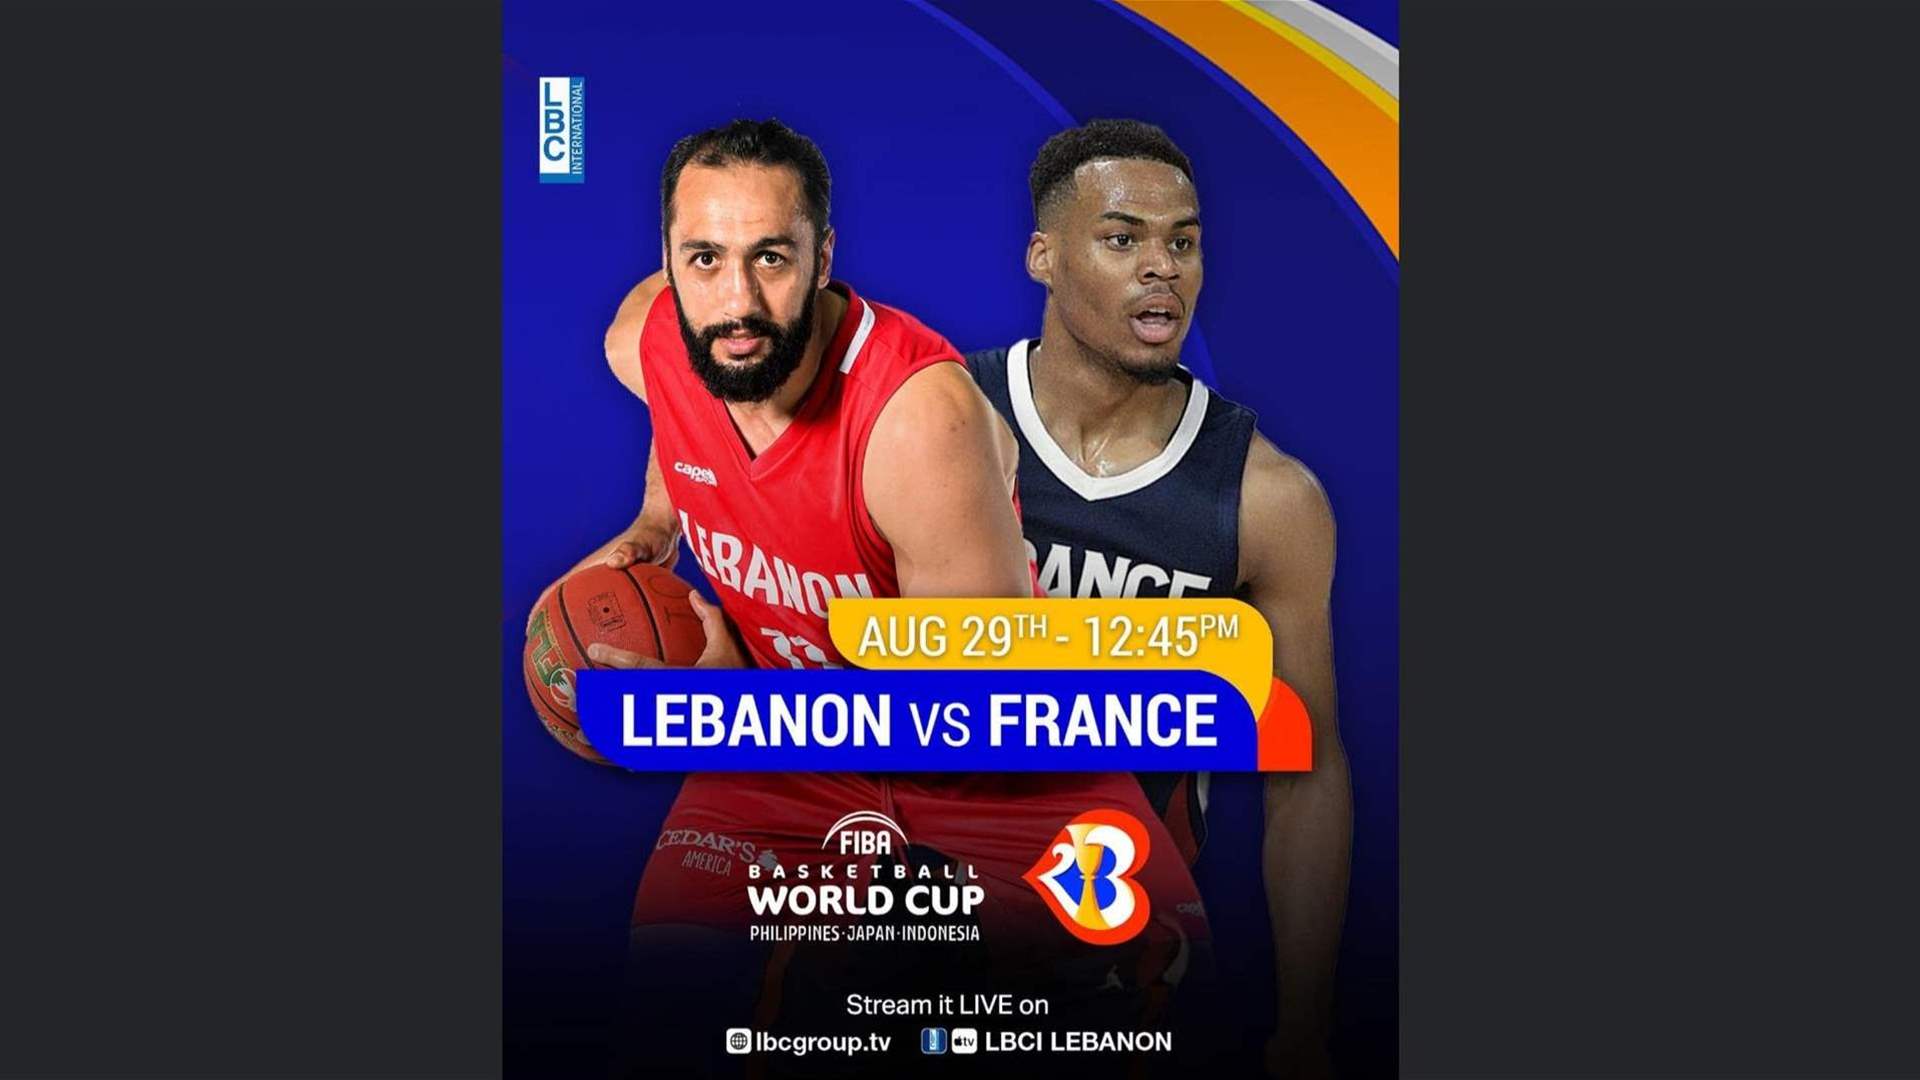 Tip off Alert! Lebanon vs France in the FIBA Basketball World Cup at 1245 PM